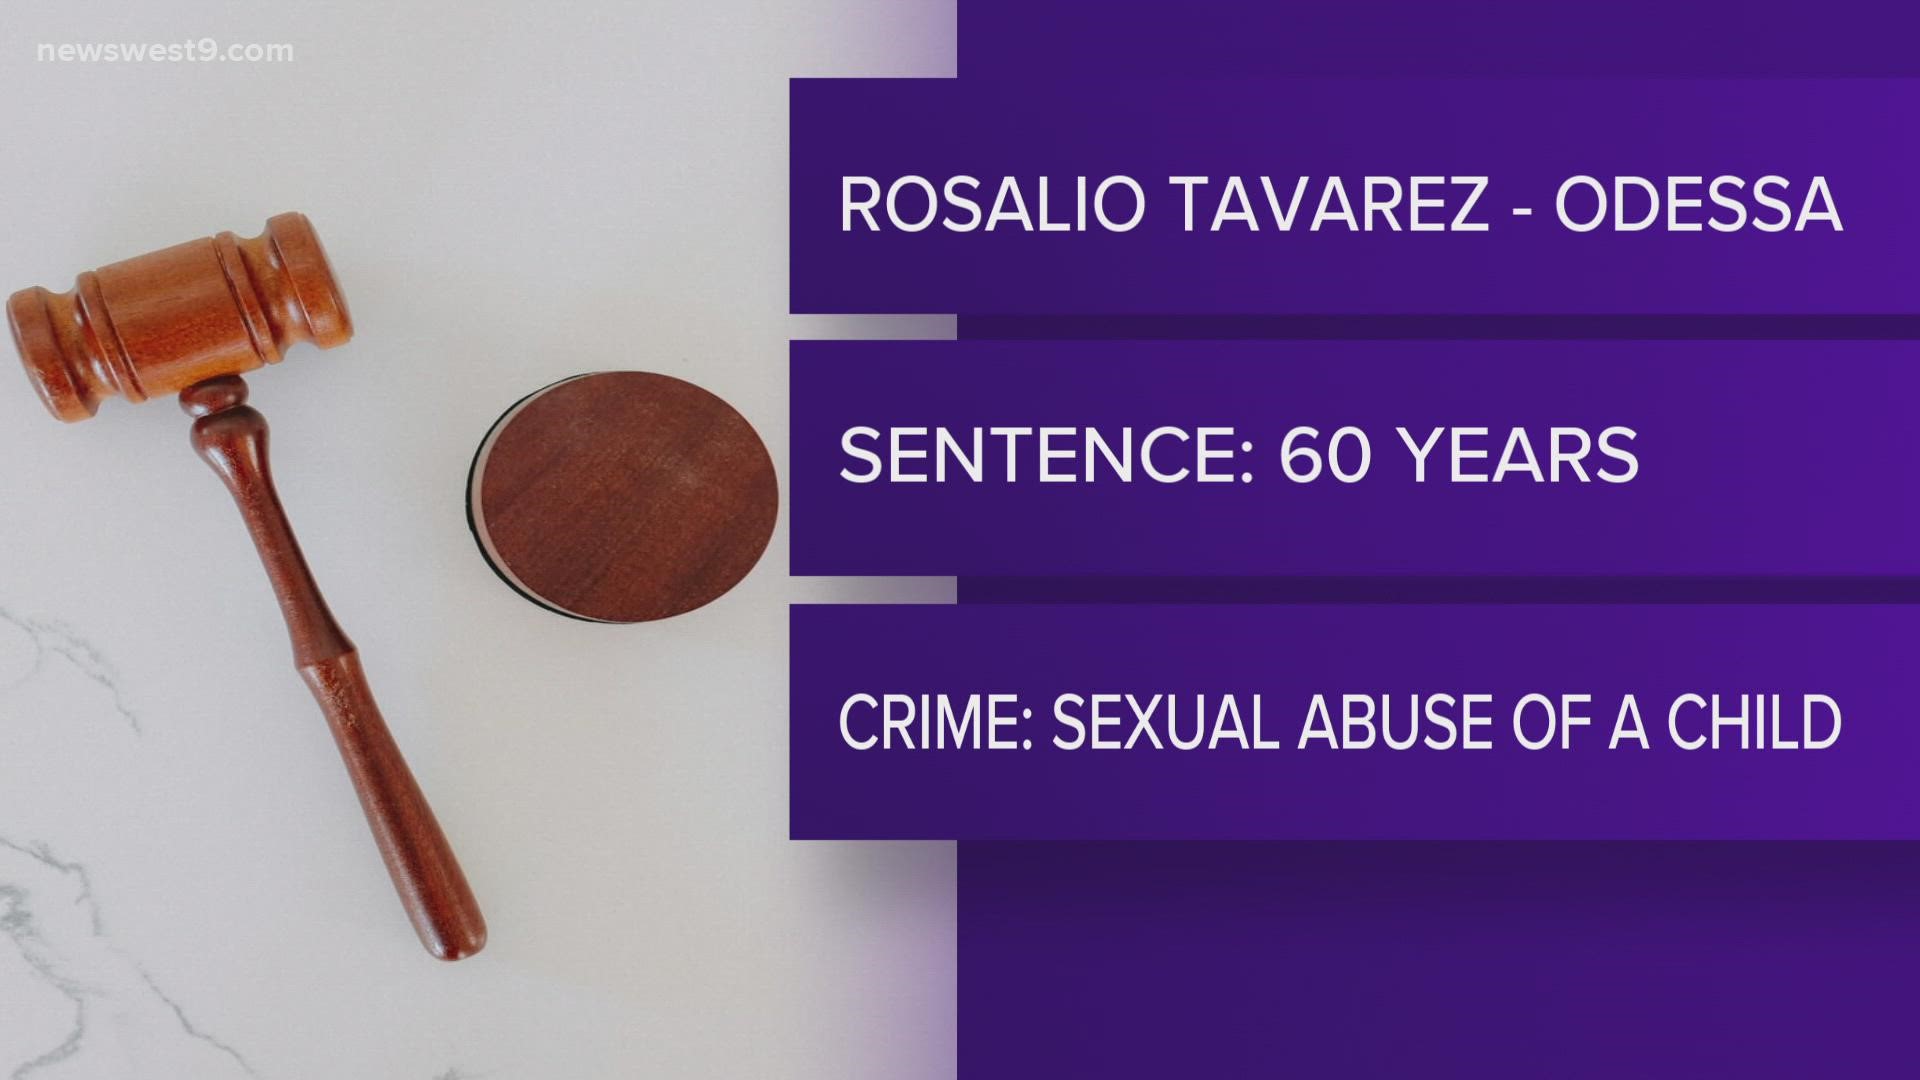 A Midland jury found Rosalio Tavarez guilty of sexually abusing a nine year old.